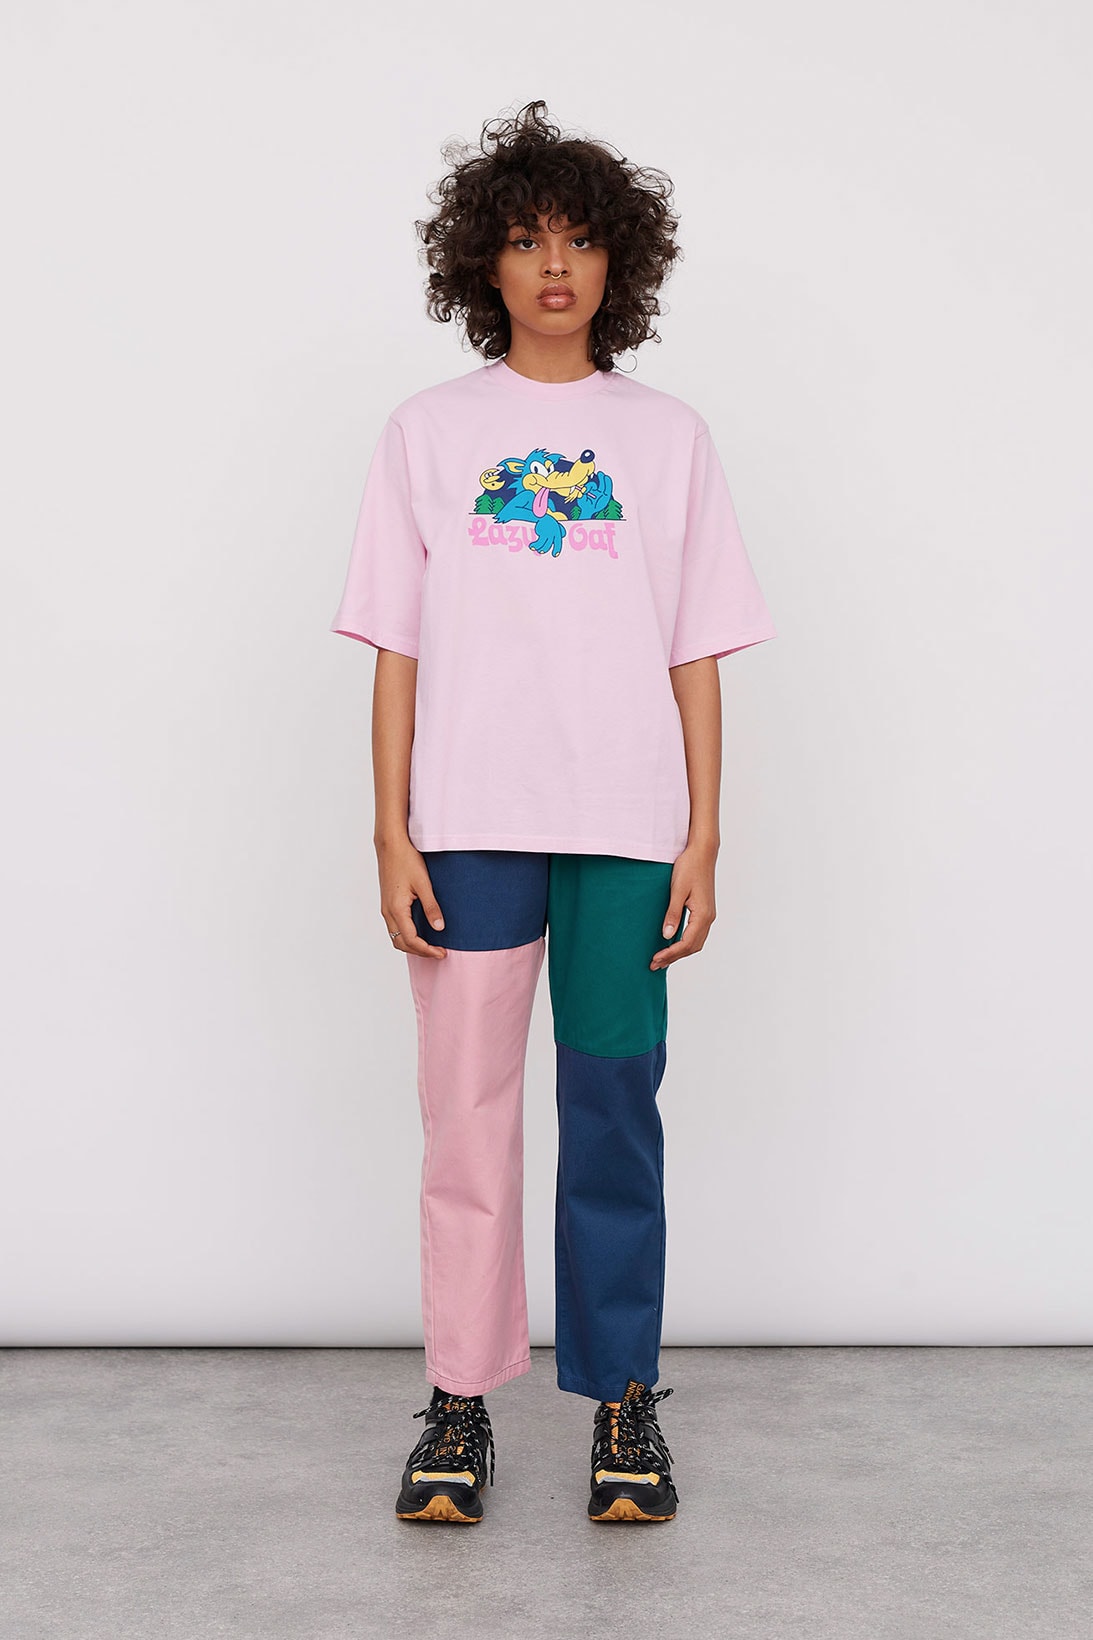 Lazy Oaf Take A Hike Outdoor Hiking Collection Lookbook Pink T-shirt Colorblocked Pants